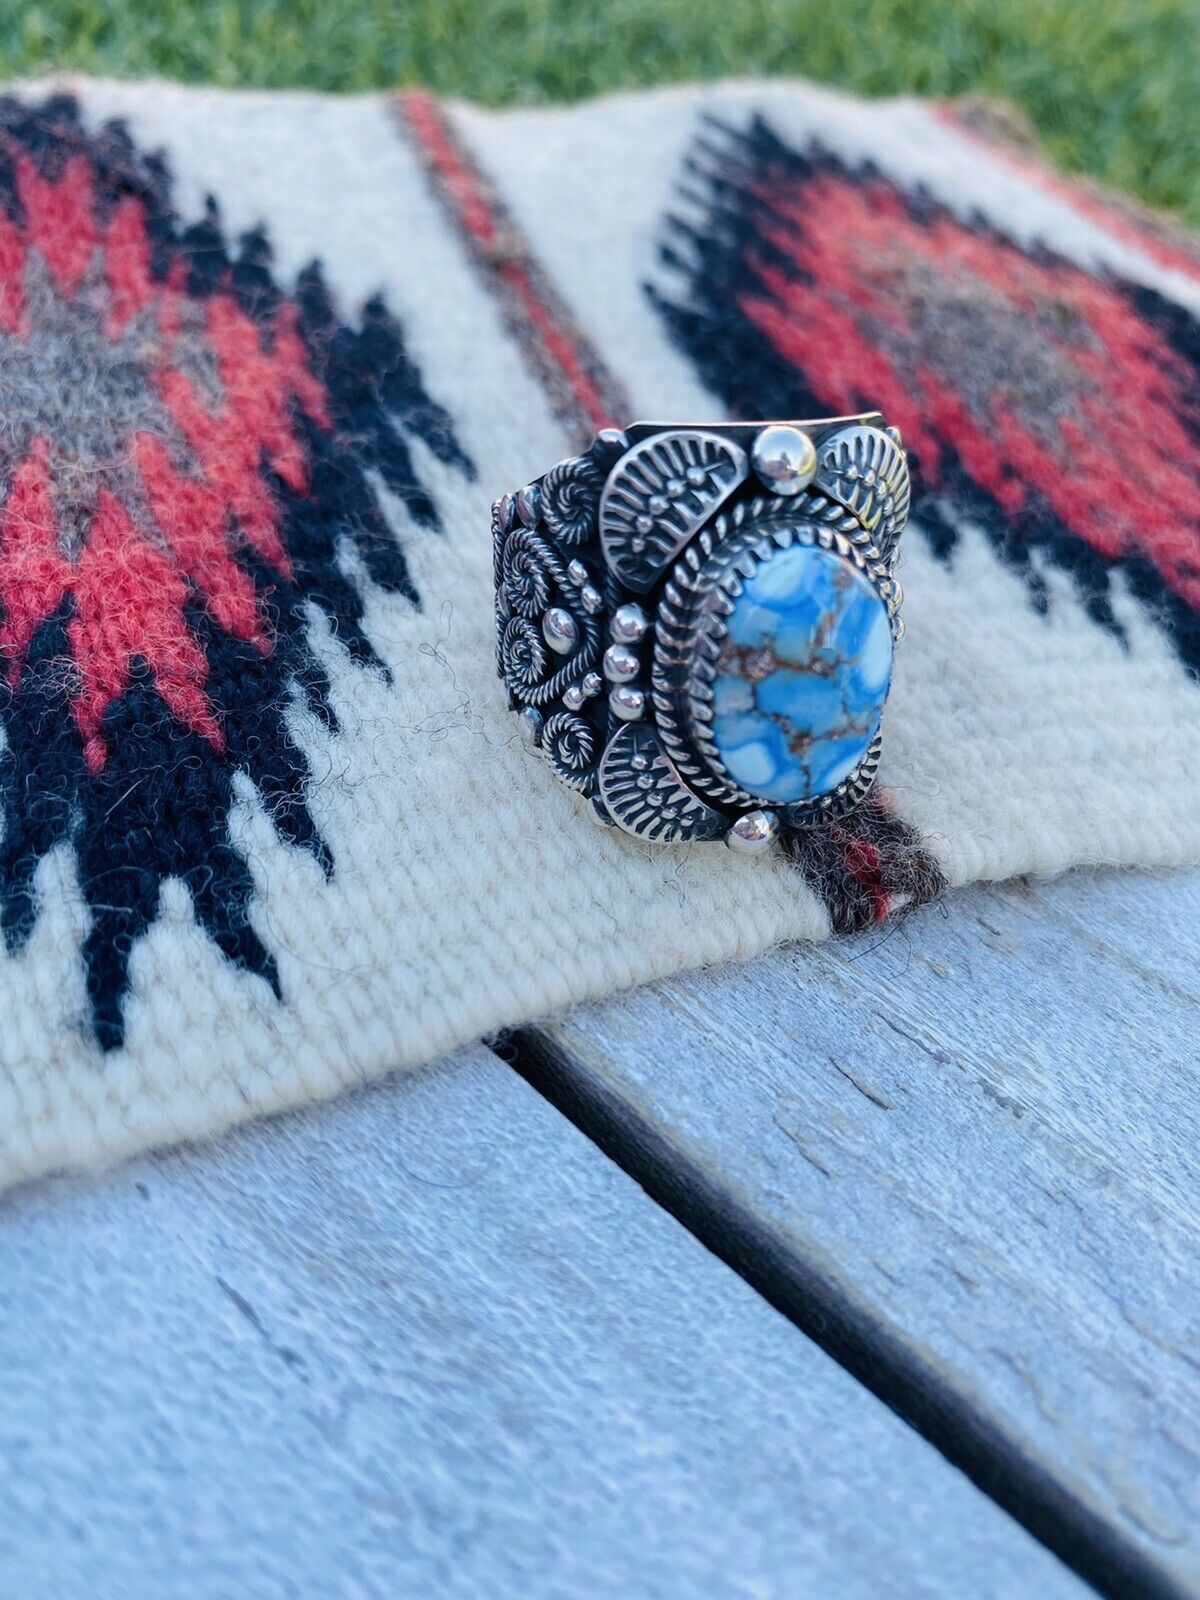 Navajo Sterling Silver & Golden Hills Turquoise Ring Size 13 By Delbert Gordon